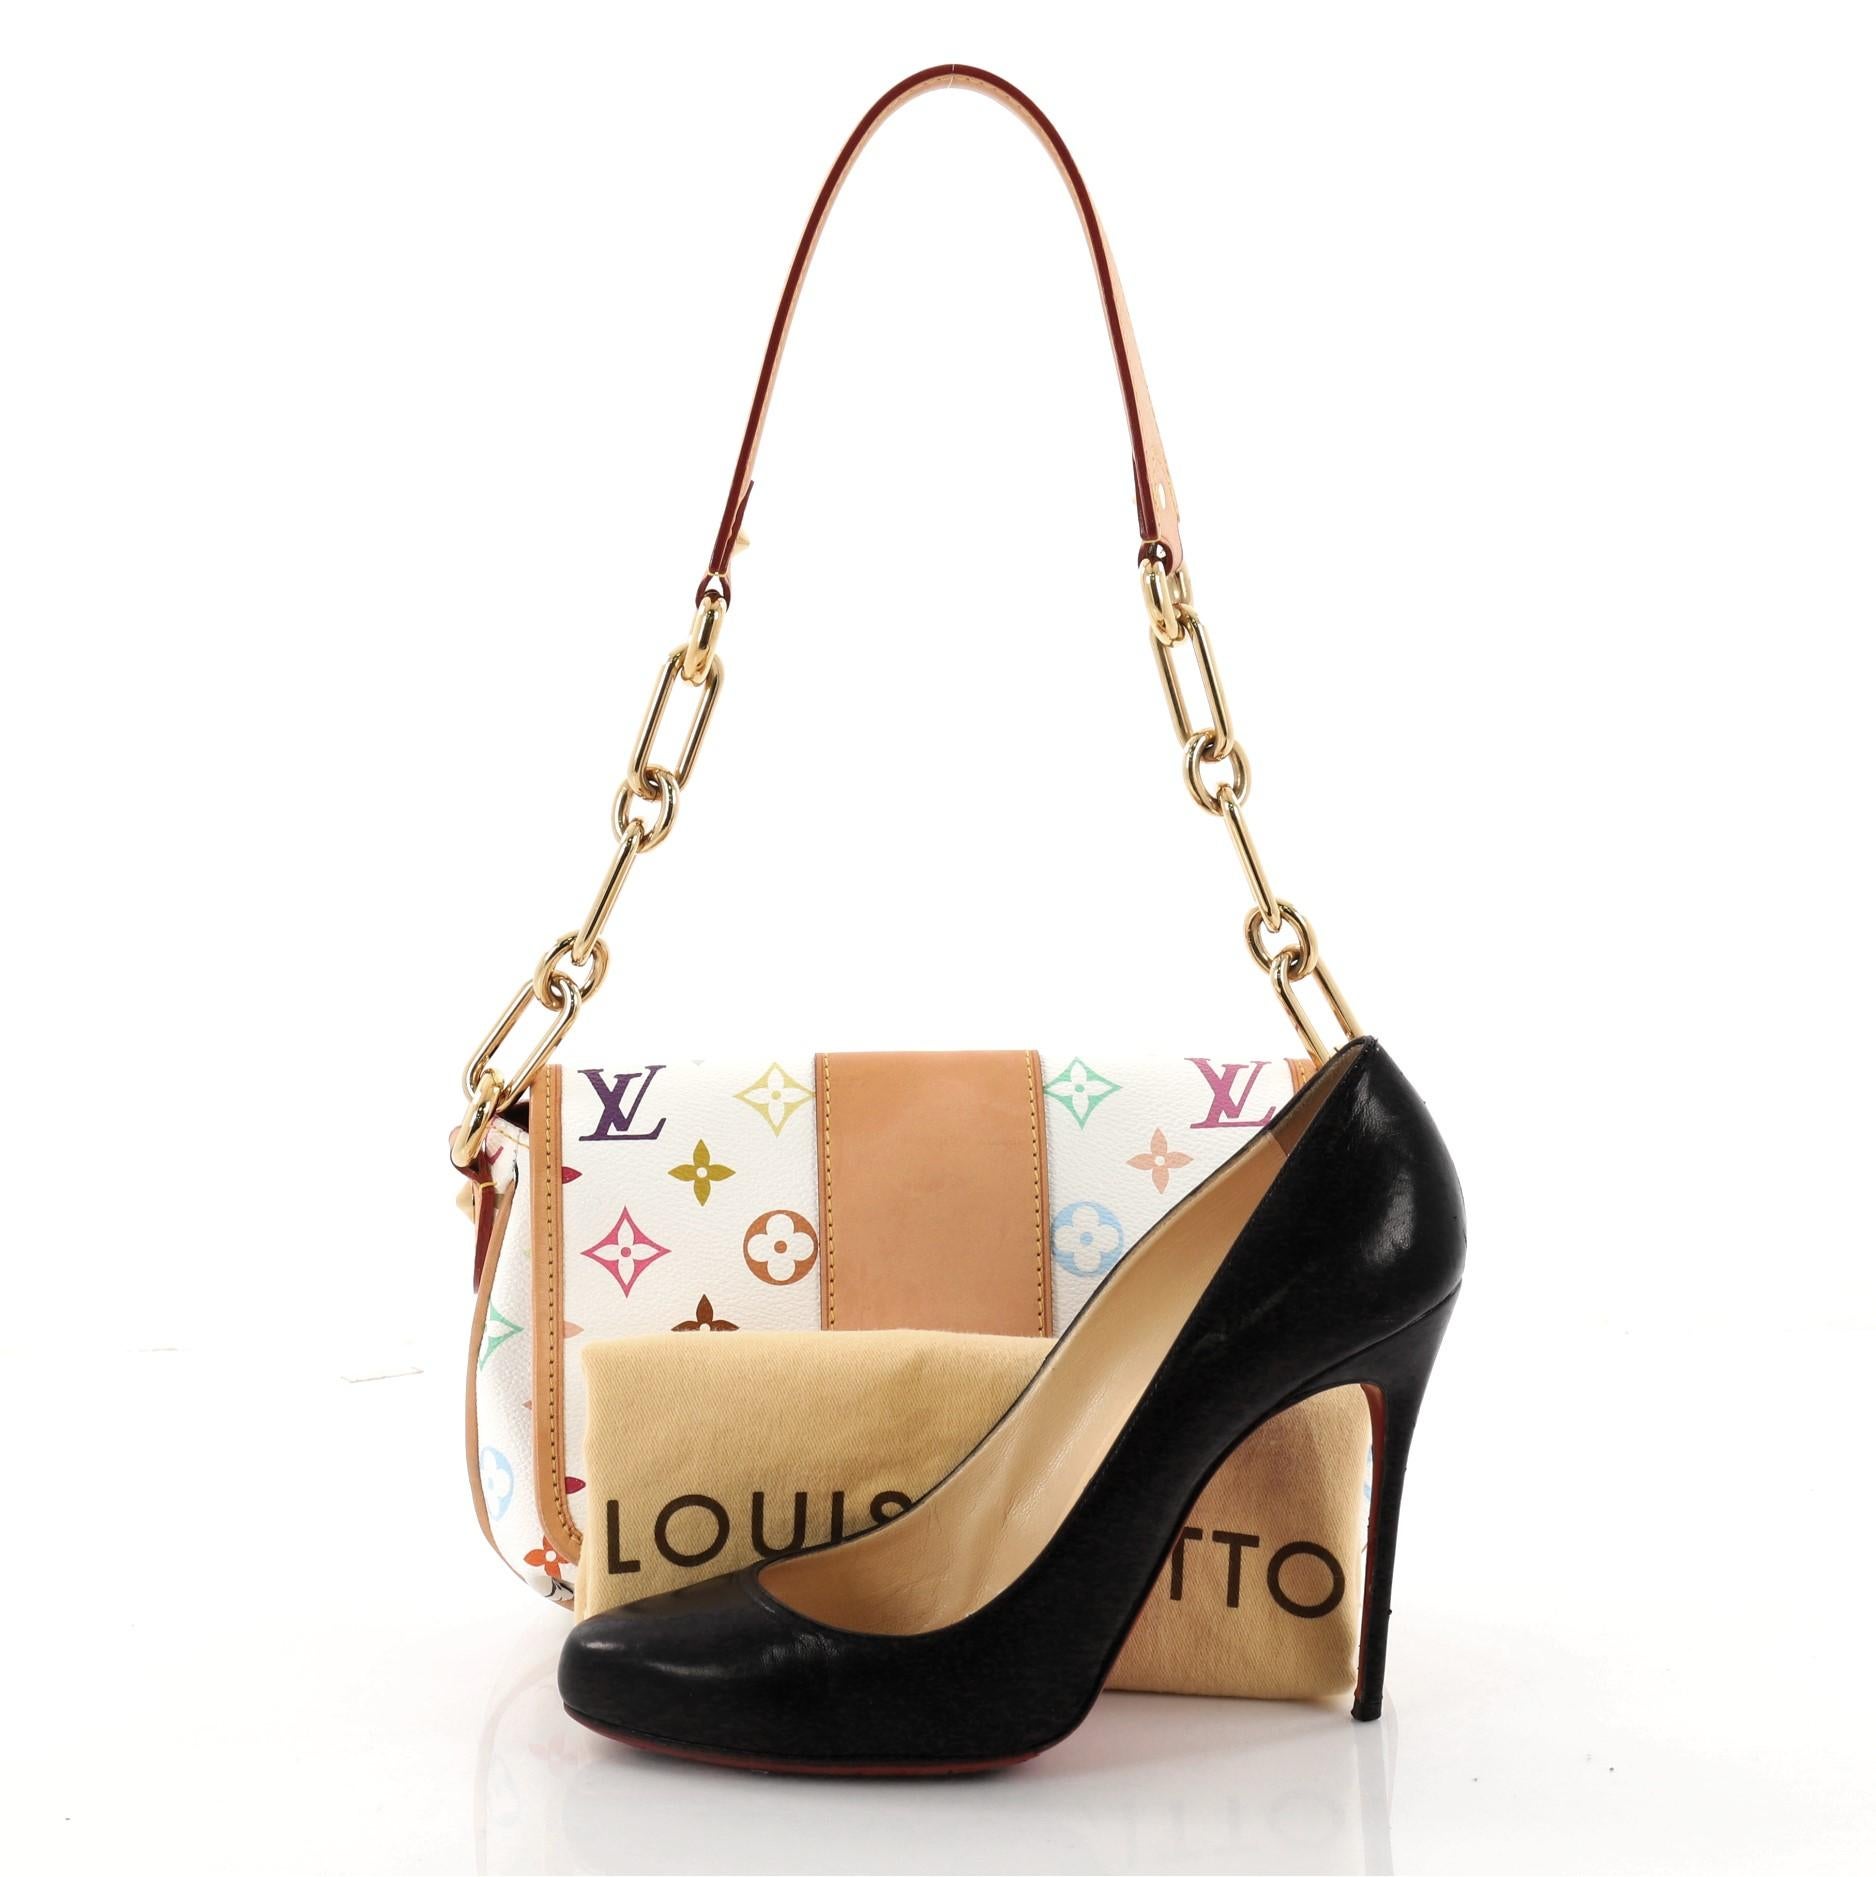 This authentic Louis Vuitton Patti Handbag Monogram Multicolor embodies the spirit of any fashionista who has a touch of rock attitude. Crafted in white monogram multicolor coated canvas, this chic bag features chain link strap with leather shoulder